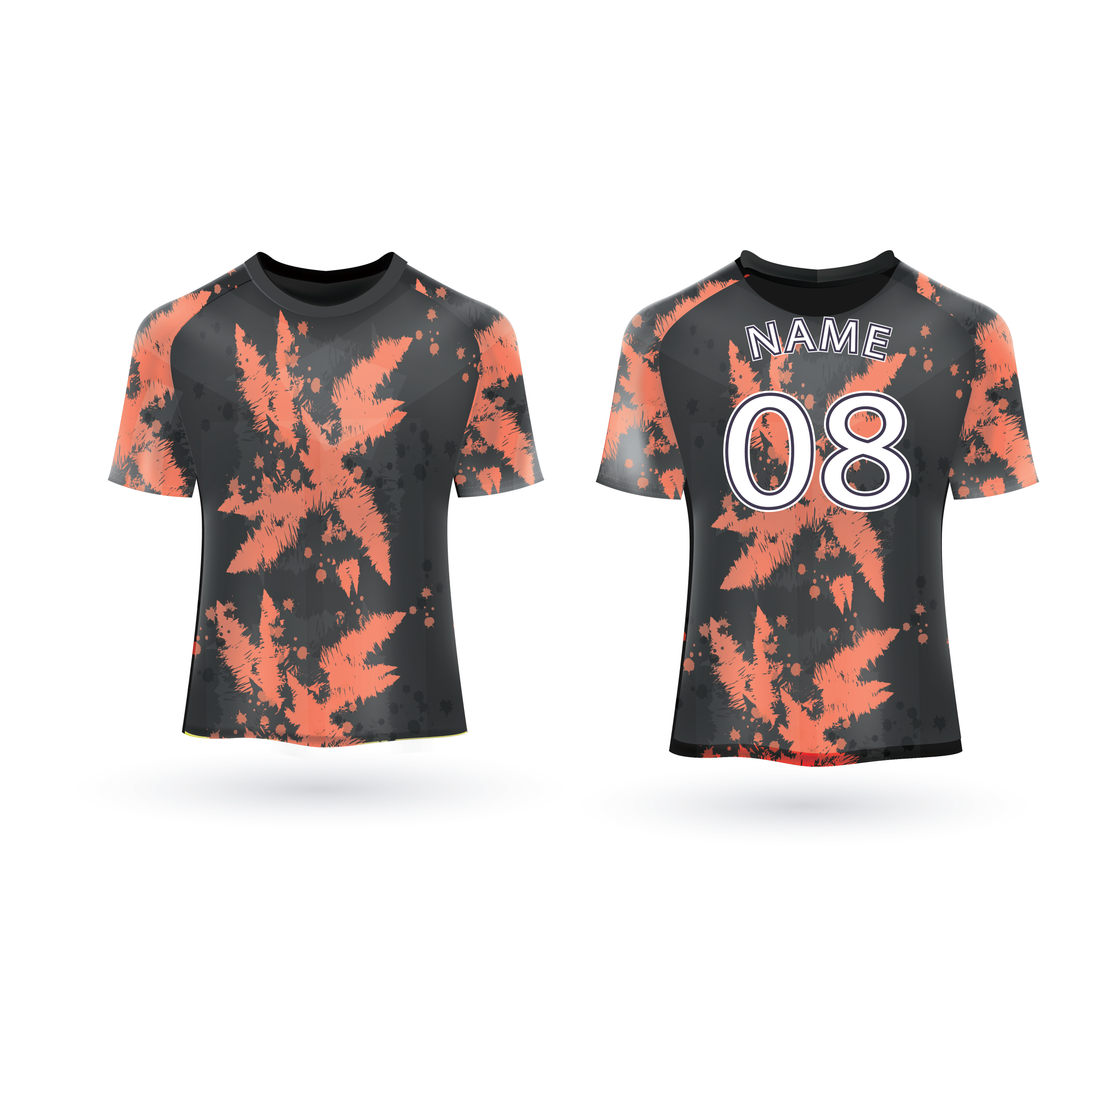 NEXT PRINT All Over Printed Customized Sublimation T-Shirt Unisex Sports Jersey Player Name & Number, Team Name NP50000271